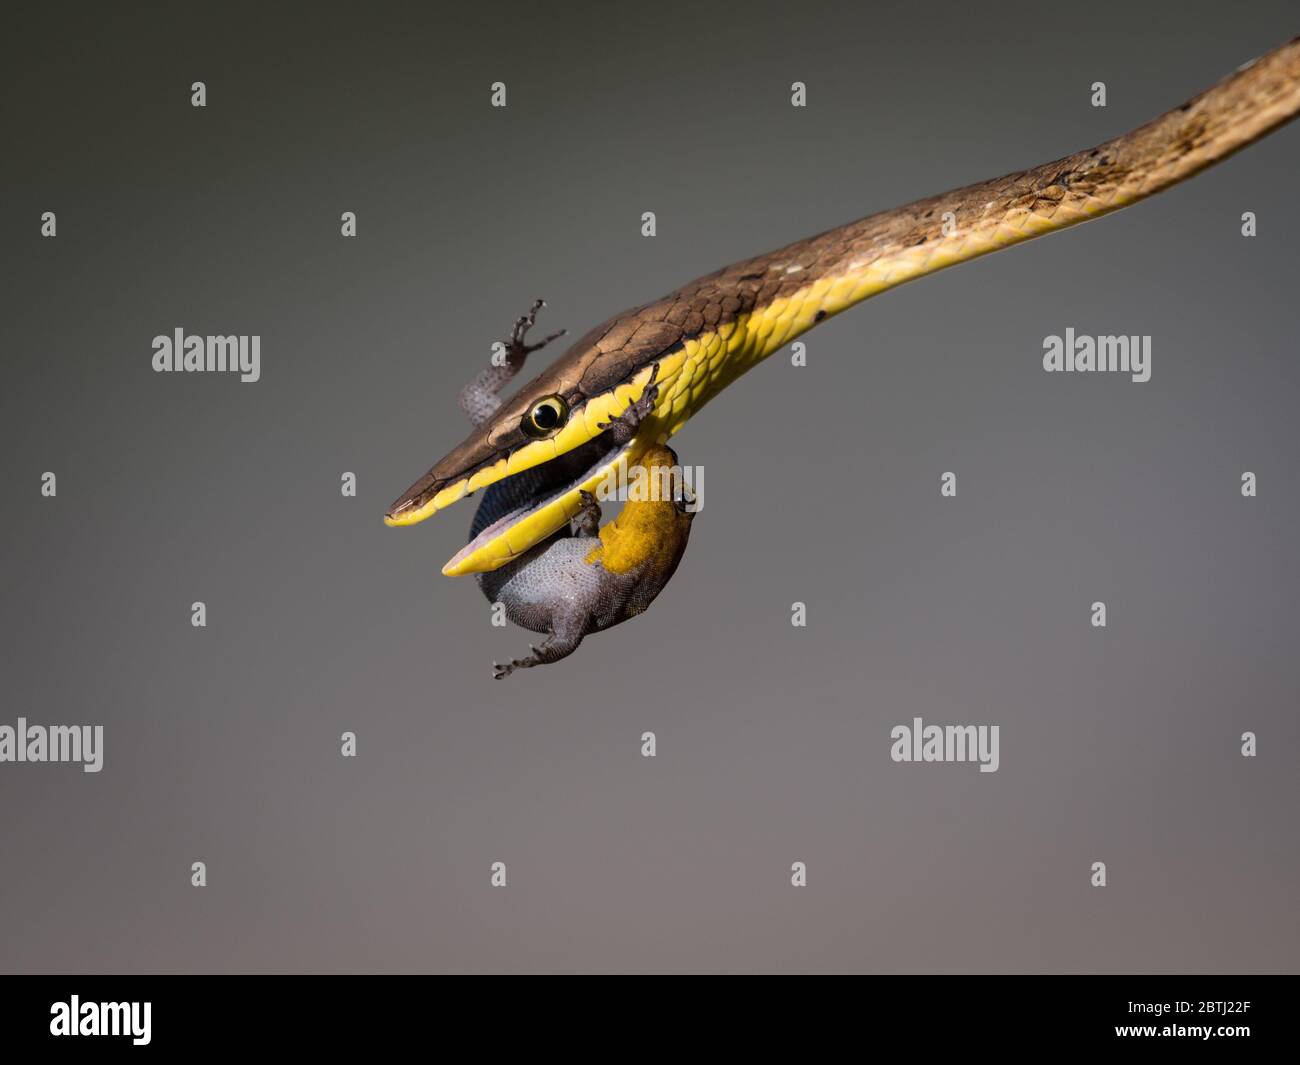 A Horsewhip snake trying to eat a gecko that is fighting back for it's life, biting the snake. Stock Photo